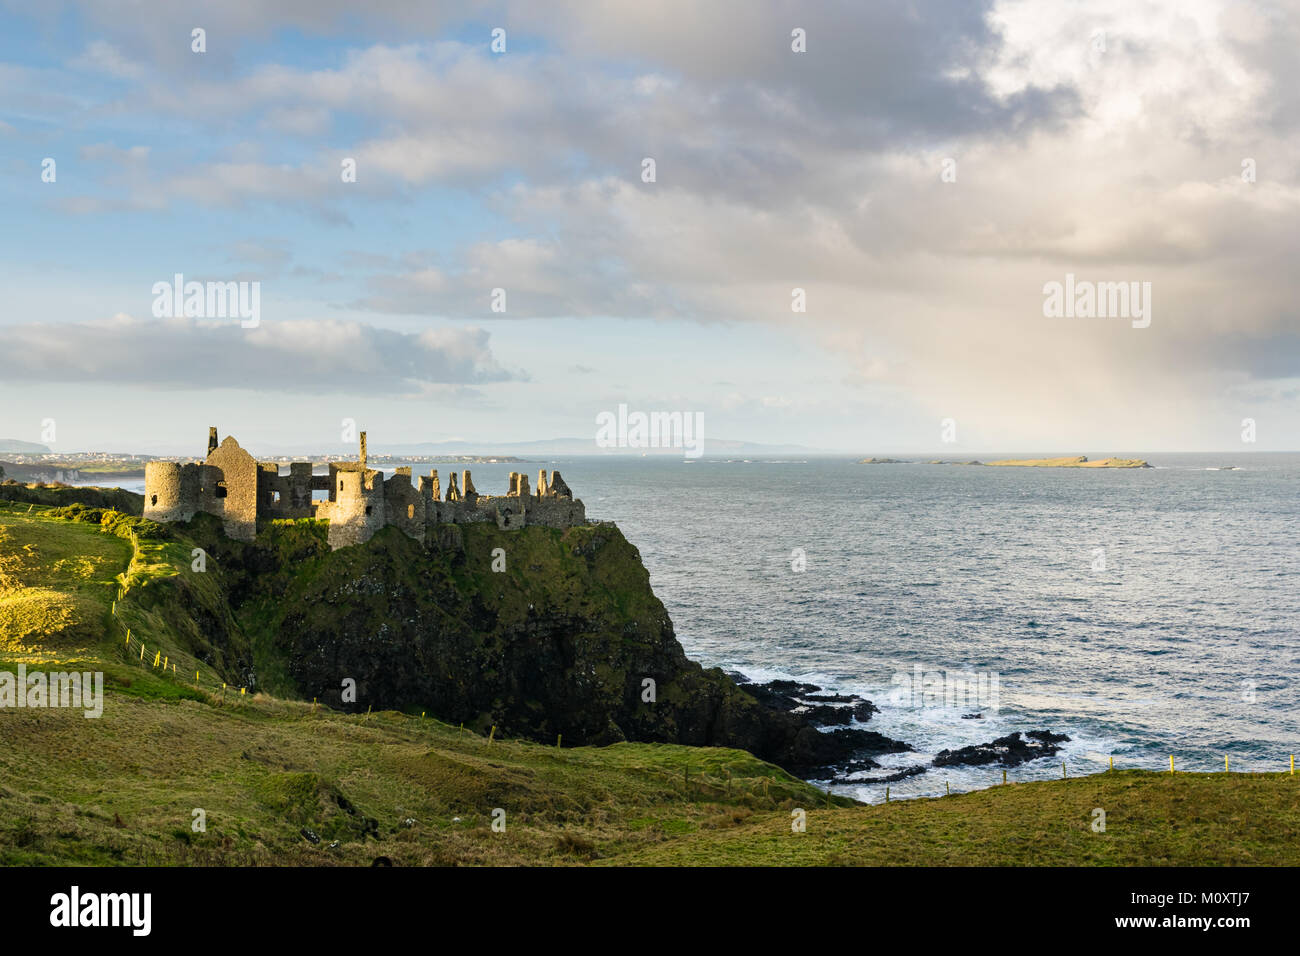 Dunluce castle on the Antrim Coast in Northern Ireland.  The ruins of the castle site on top of a cliff over looking the ocean Stock Photo